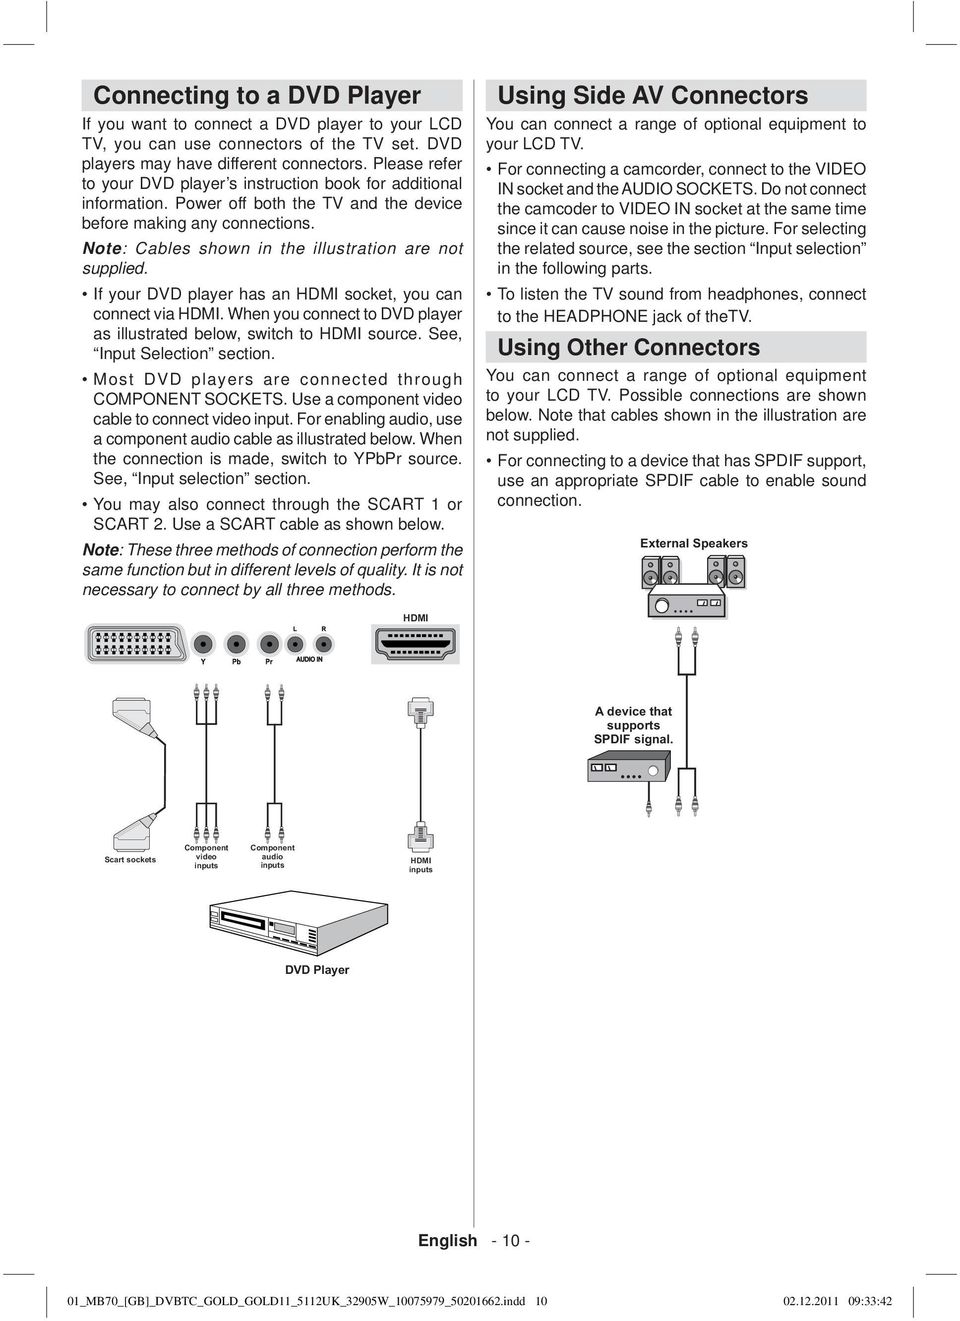 Note: Cables shown in the illustration are not supplied. If your DVD player has an HDMI socket, you can connect via HDMI. When you connect to DVD player as illustrated below, switch to HDMI source.